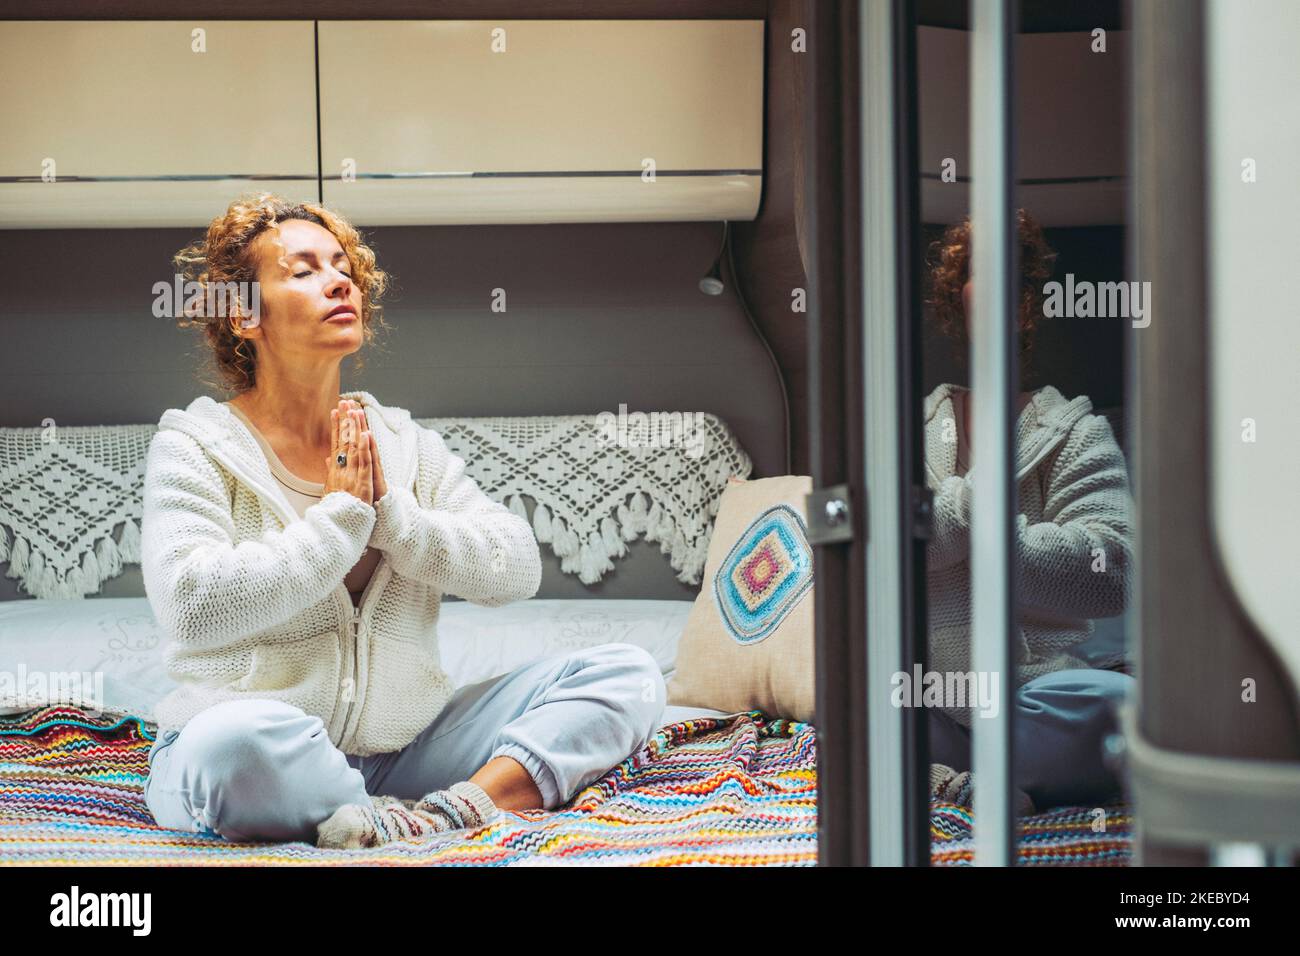 One woman doing meditation and praying leisure activity alone in camper van bedroom. Concept of people and alternative zen lifestyle. Travel on transport caravan vehicle concept life. Healthy mind Stock Photo